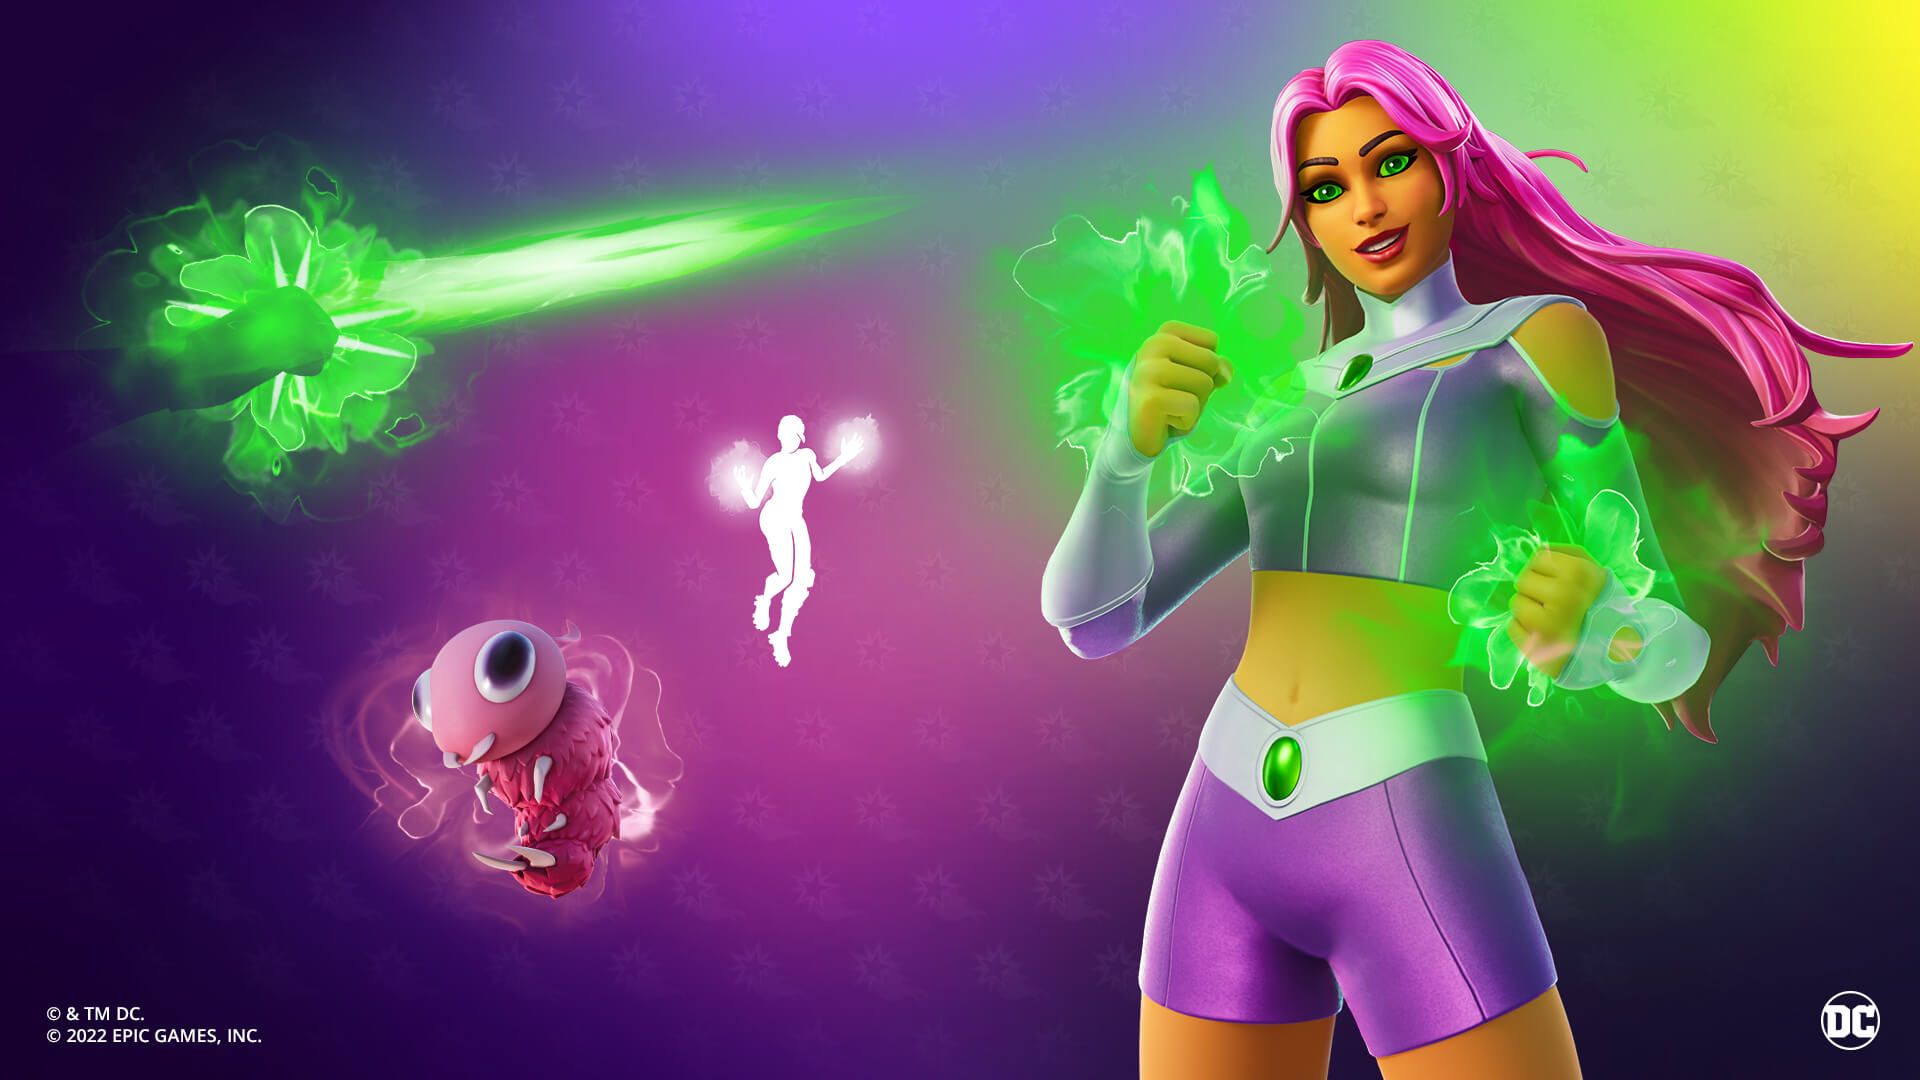 How to get the Fortnite Starfire bundle?